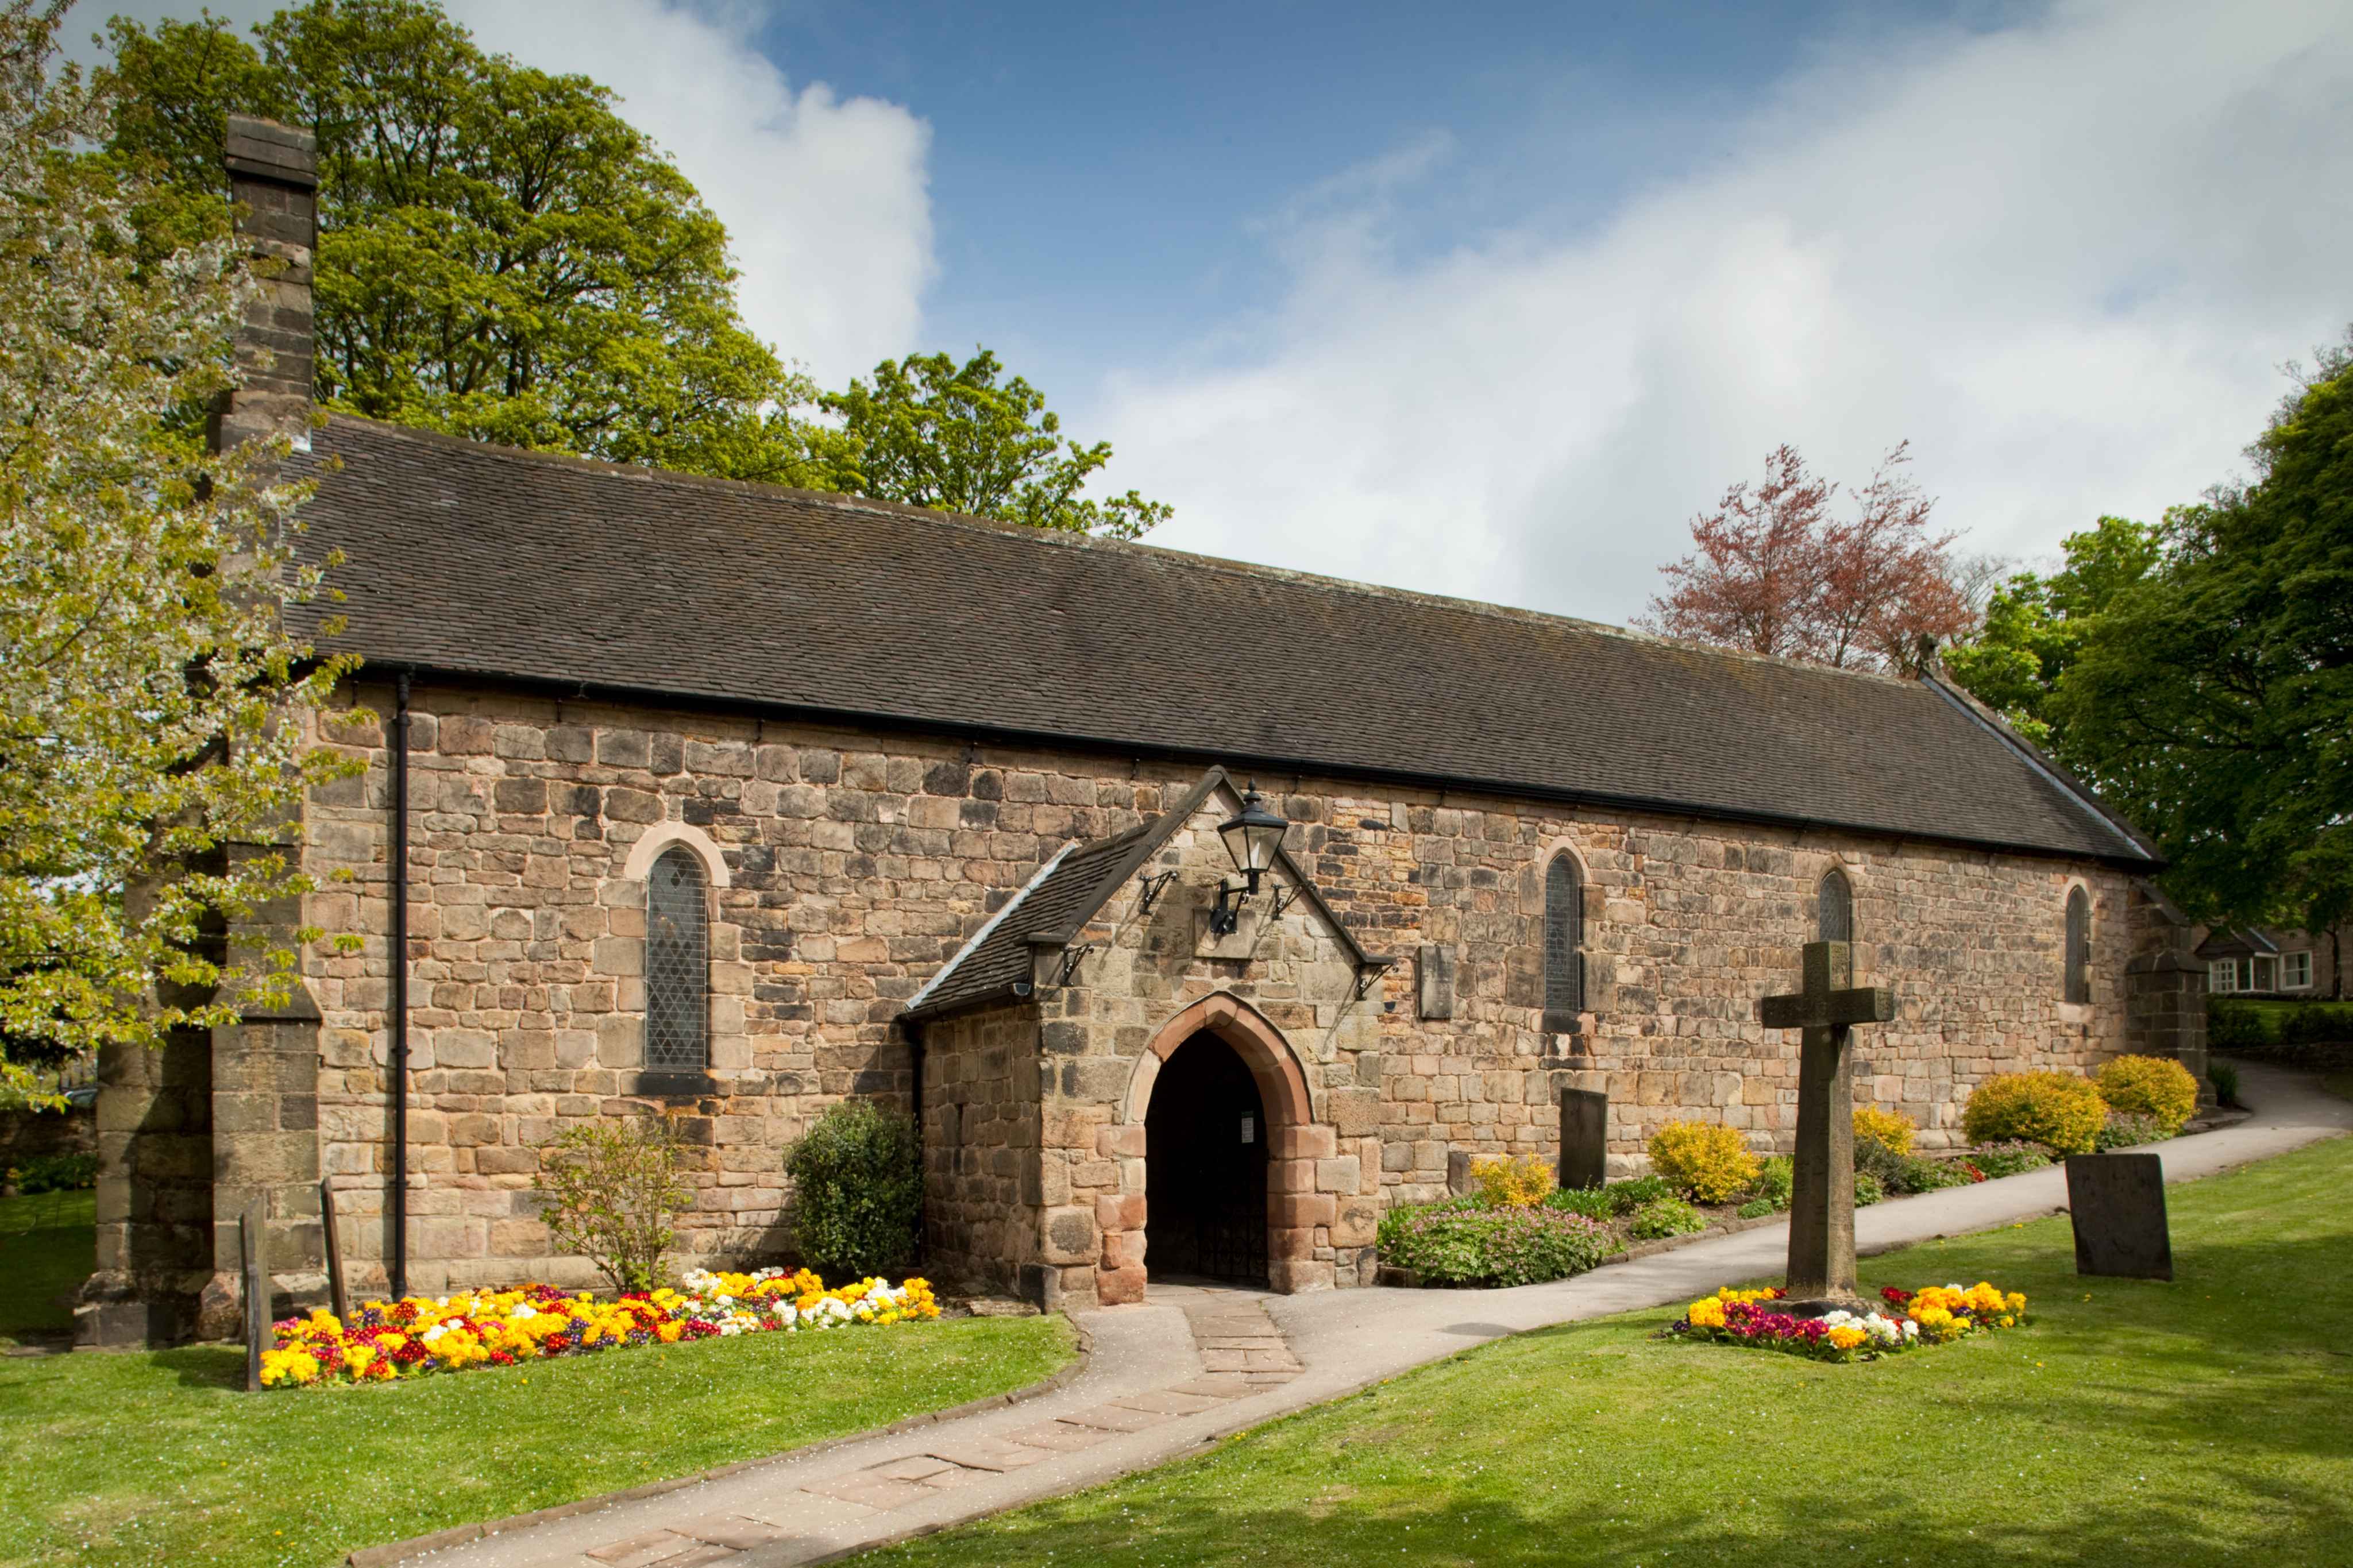 Image of the exterior of a small church with a stone cross outside and neat flowerbeds.